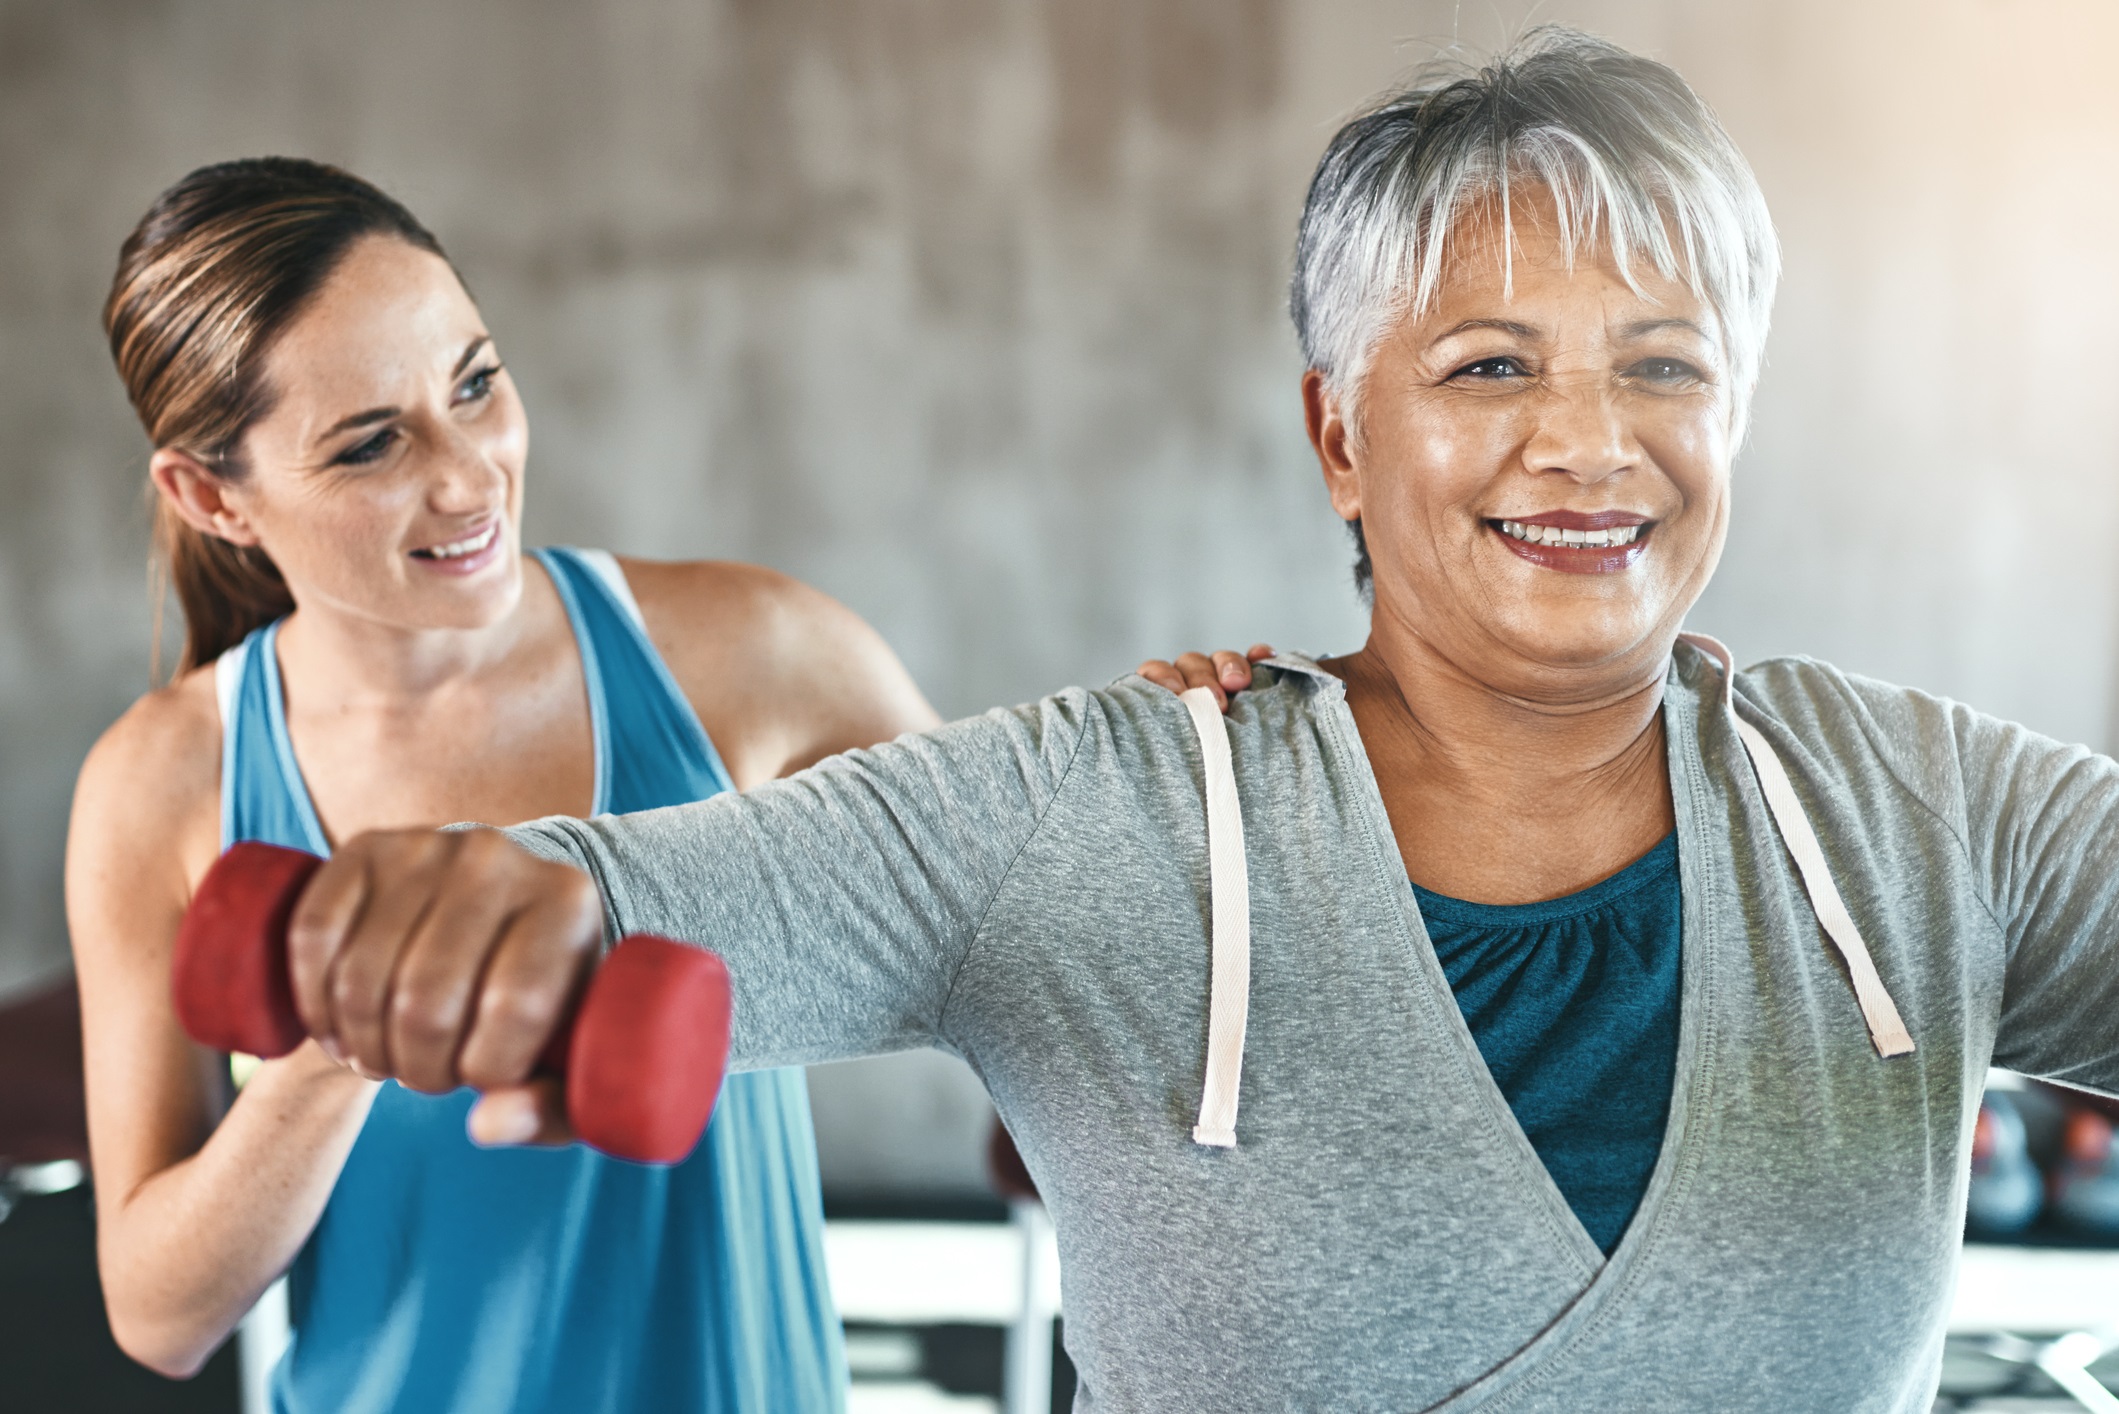 Tips to start exercise after having a stroke